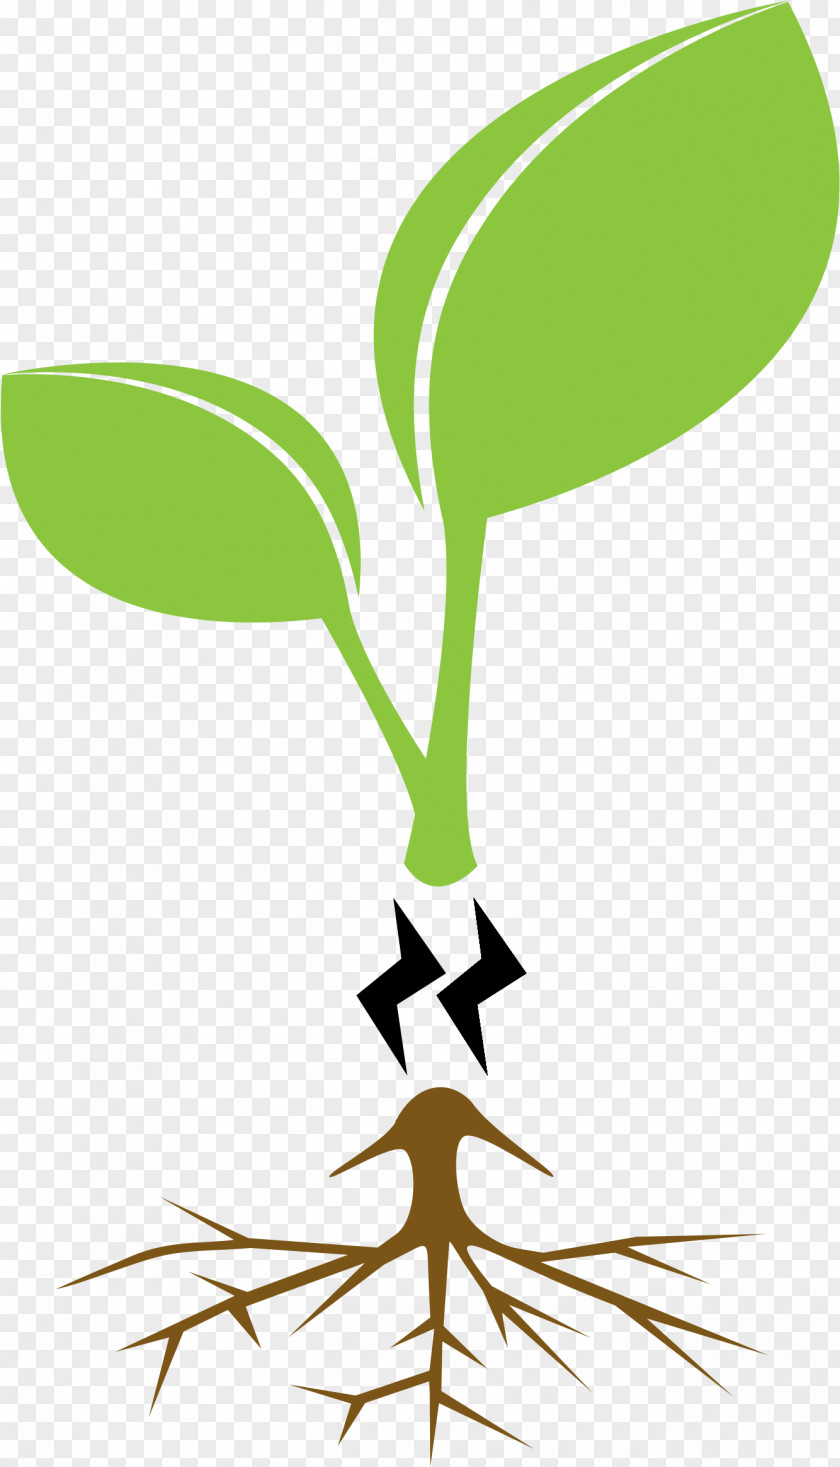 Floating Leaves Tree Animation Clip Art PNG